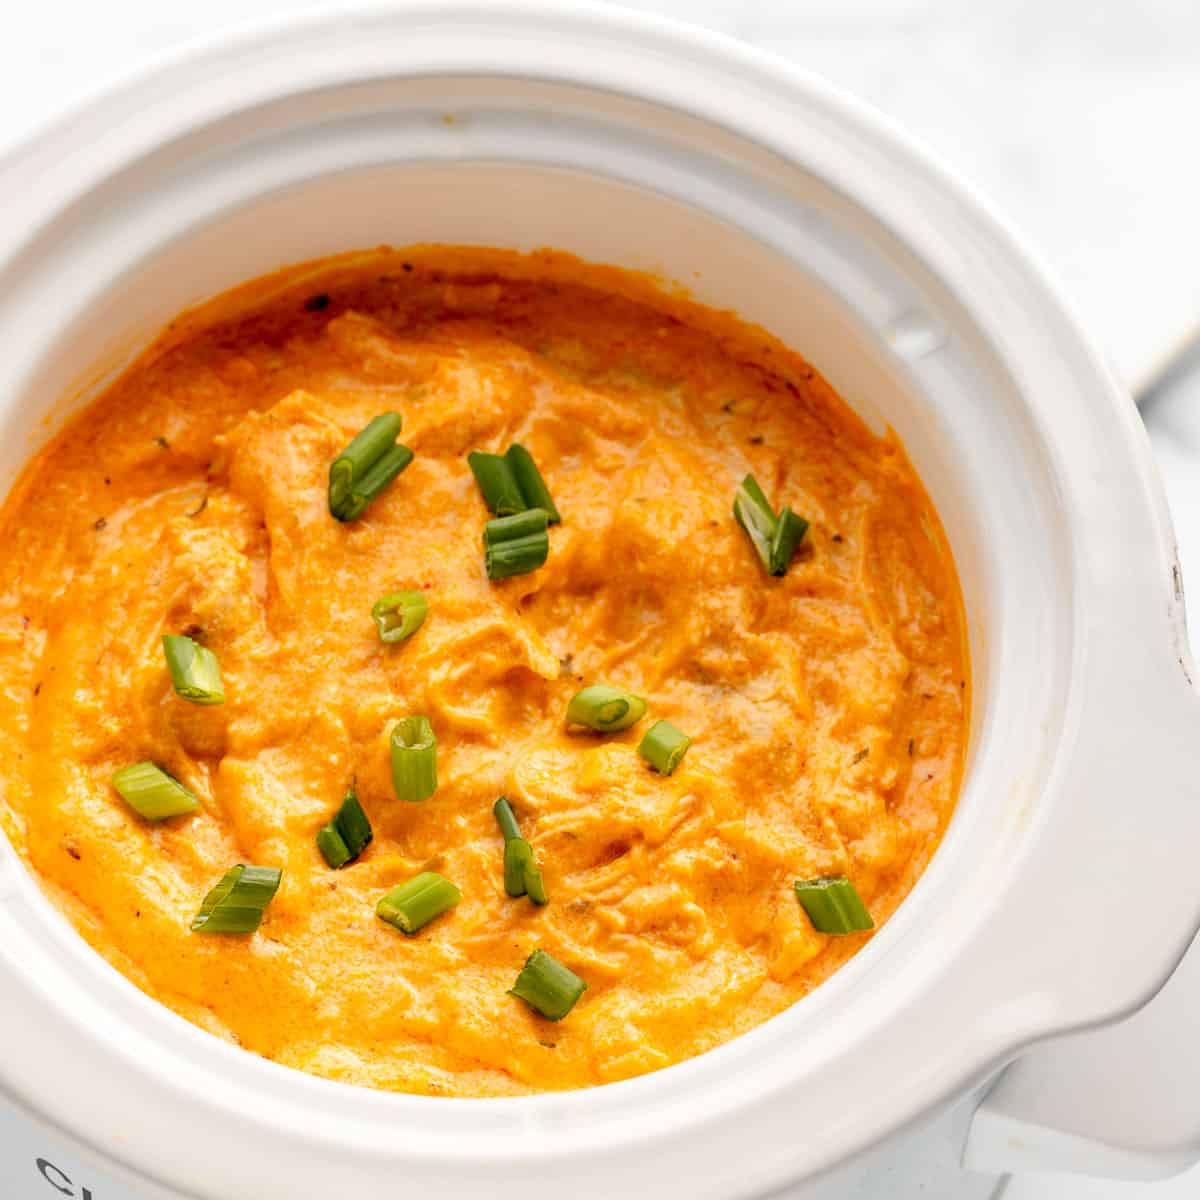 Finished buffalo chicken dip topped with scallions in a white slow cooker